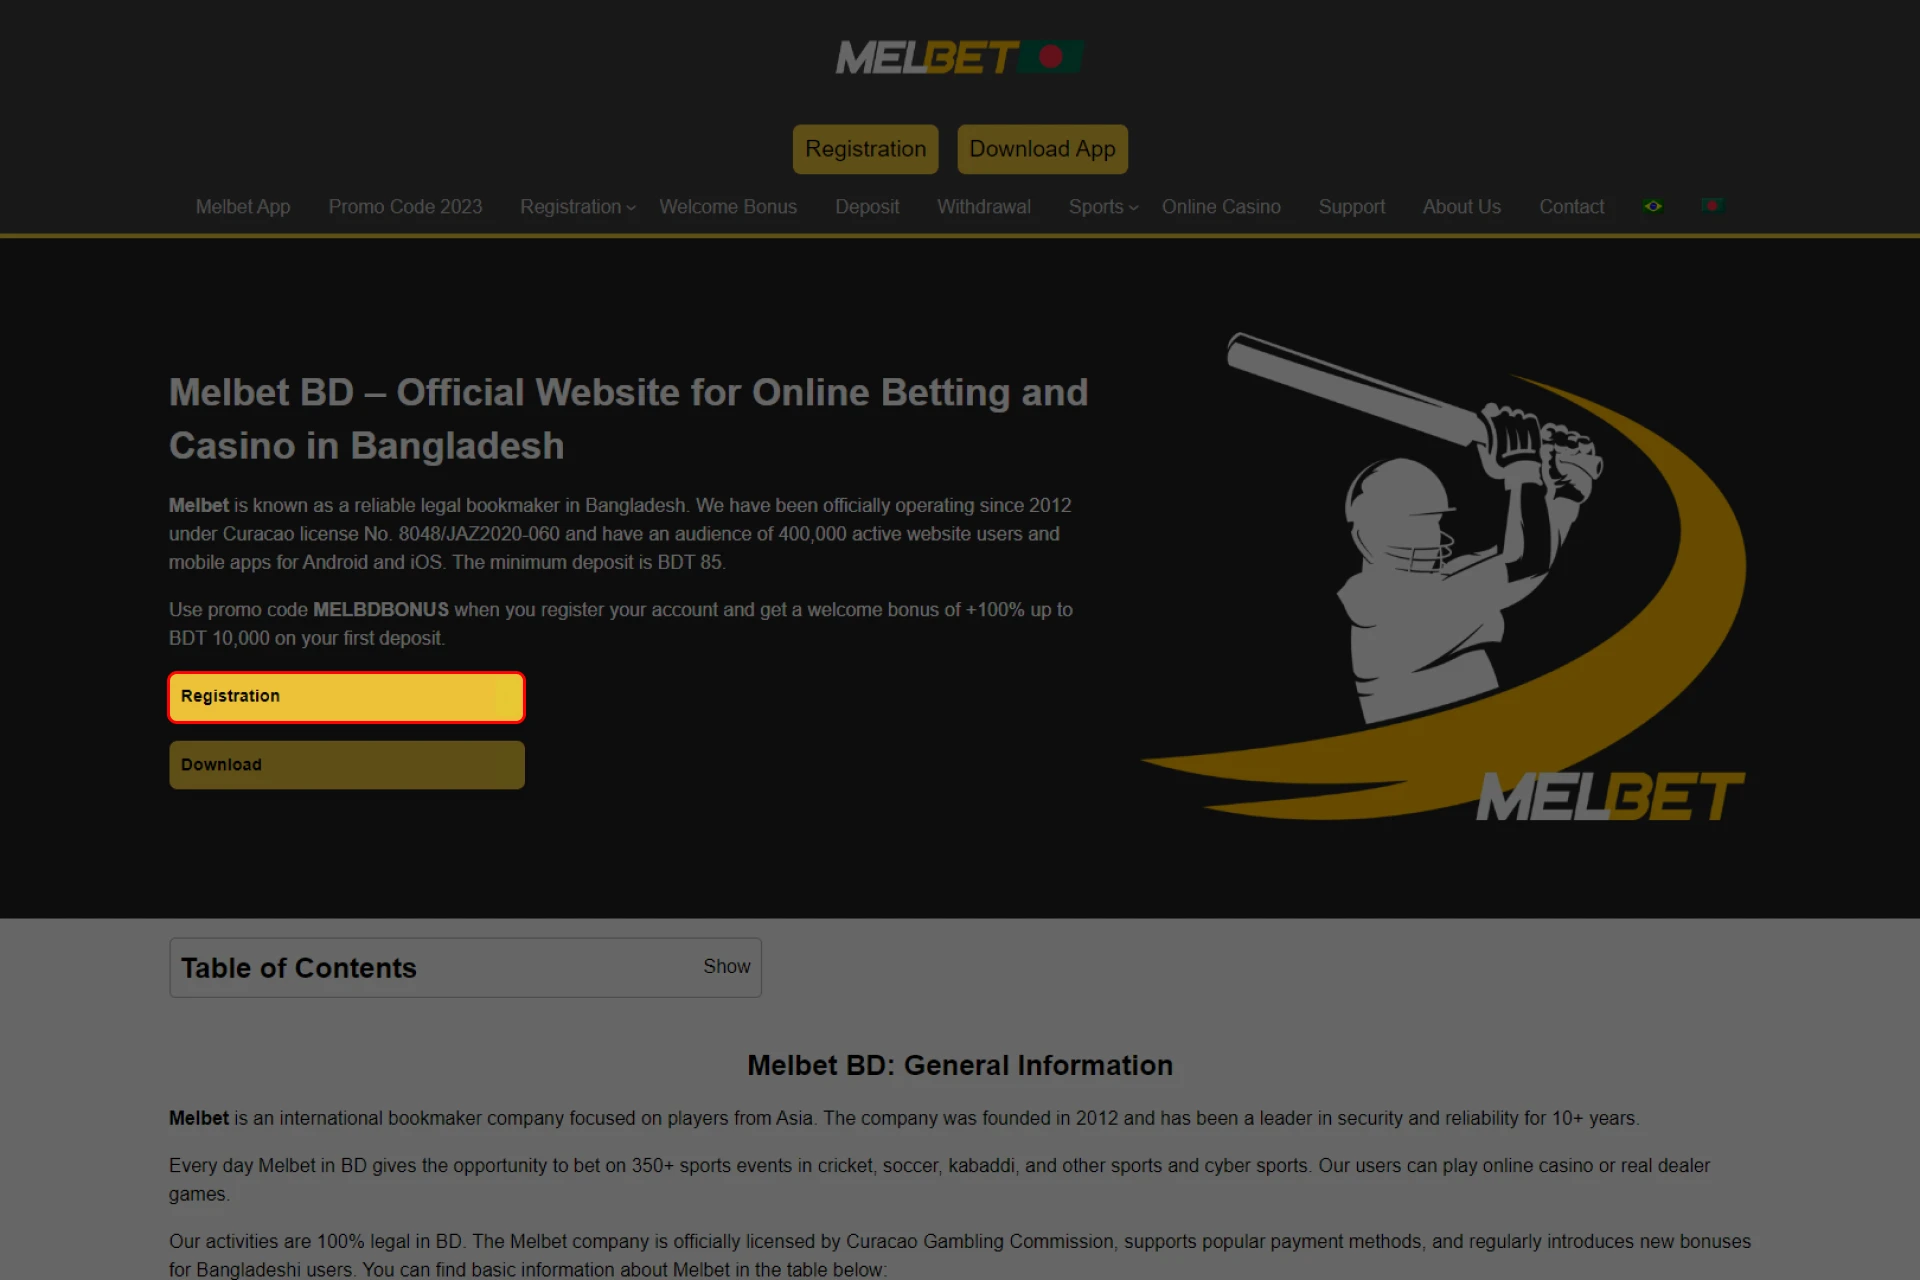 Click on the button and create a new account on Melbet.